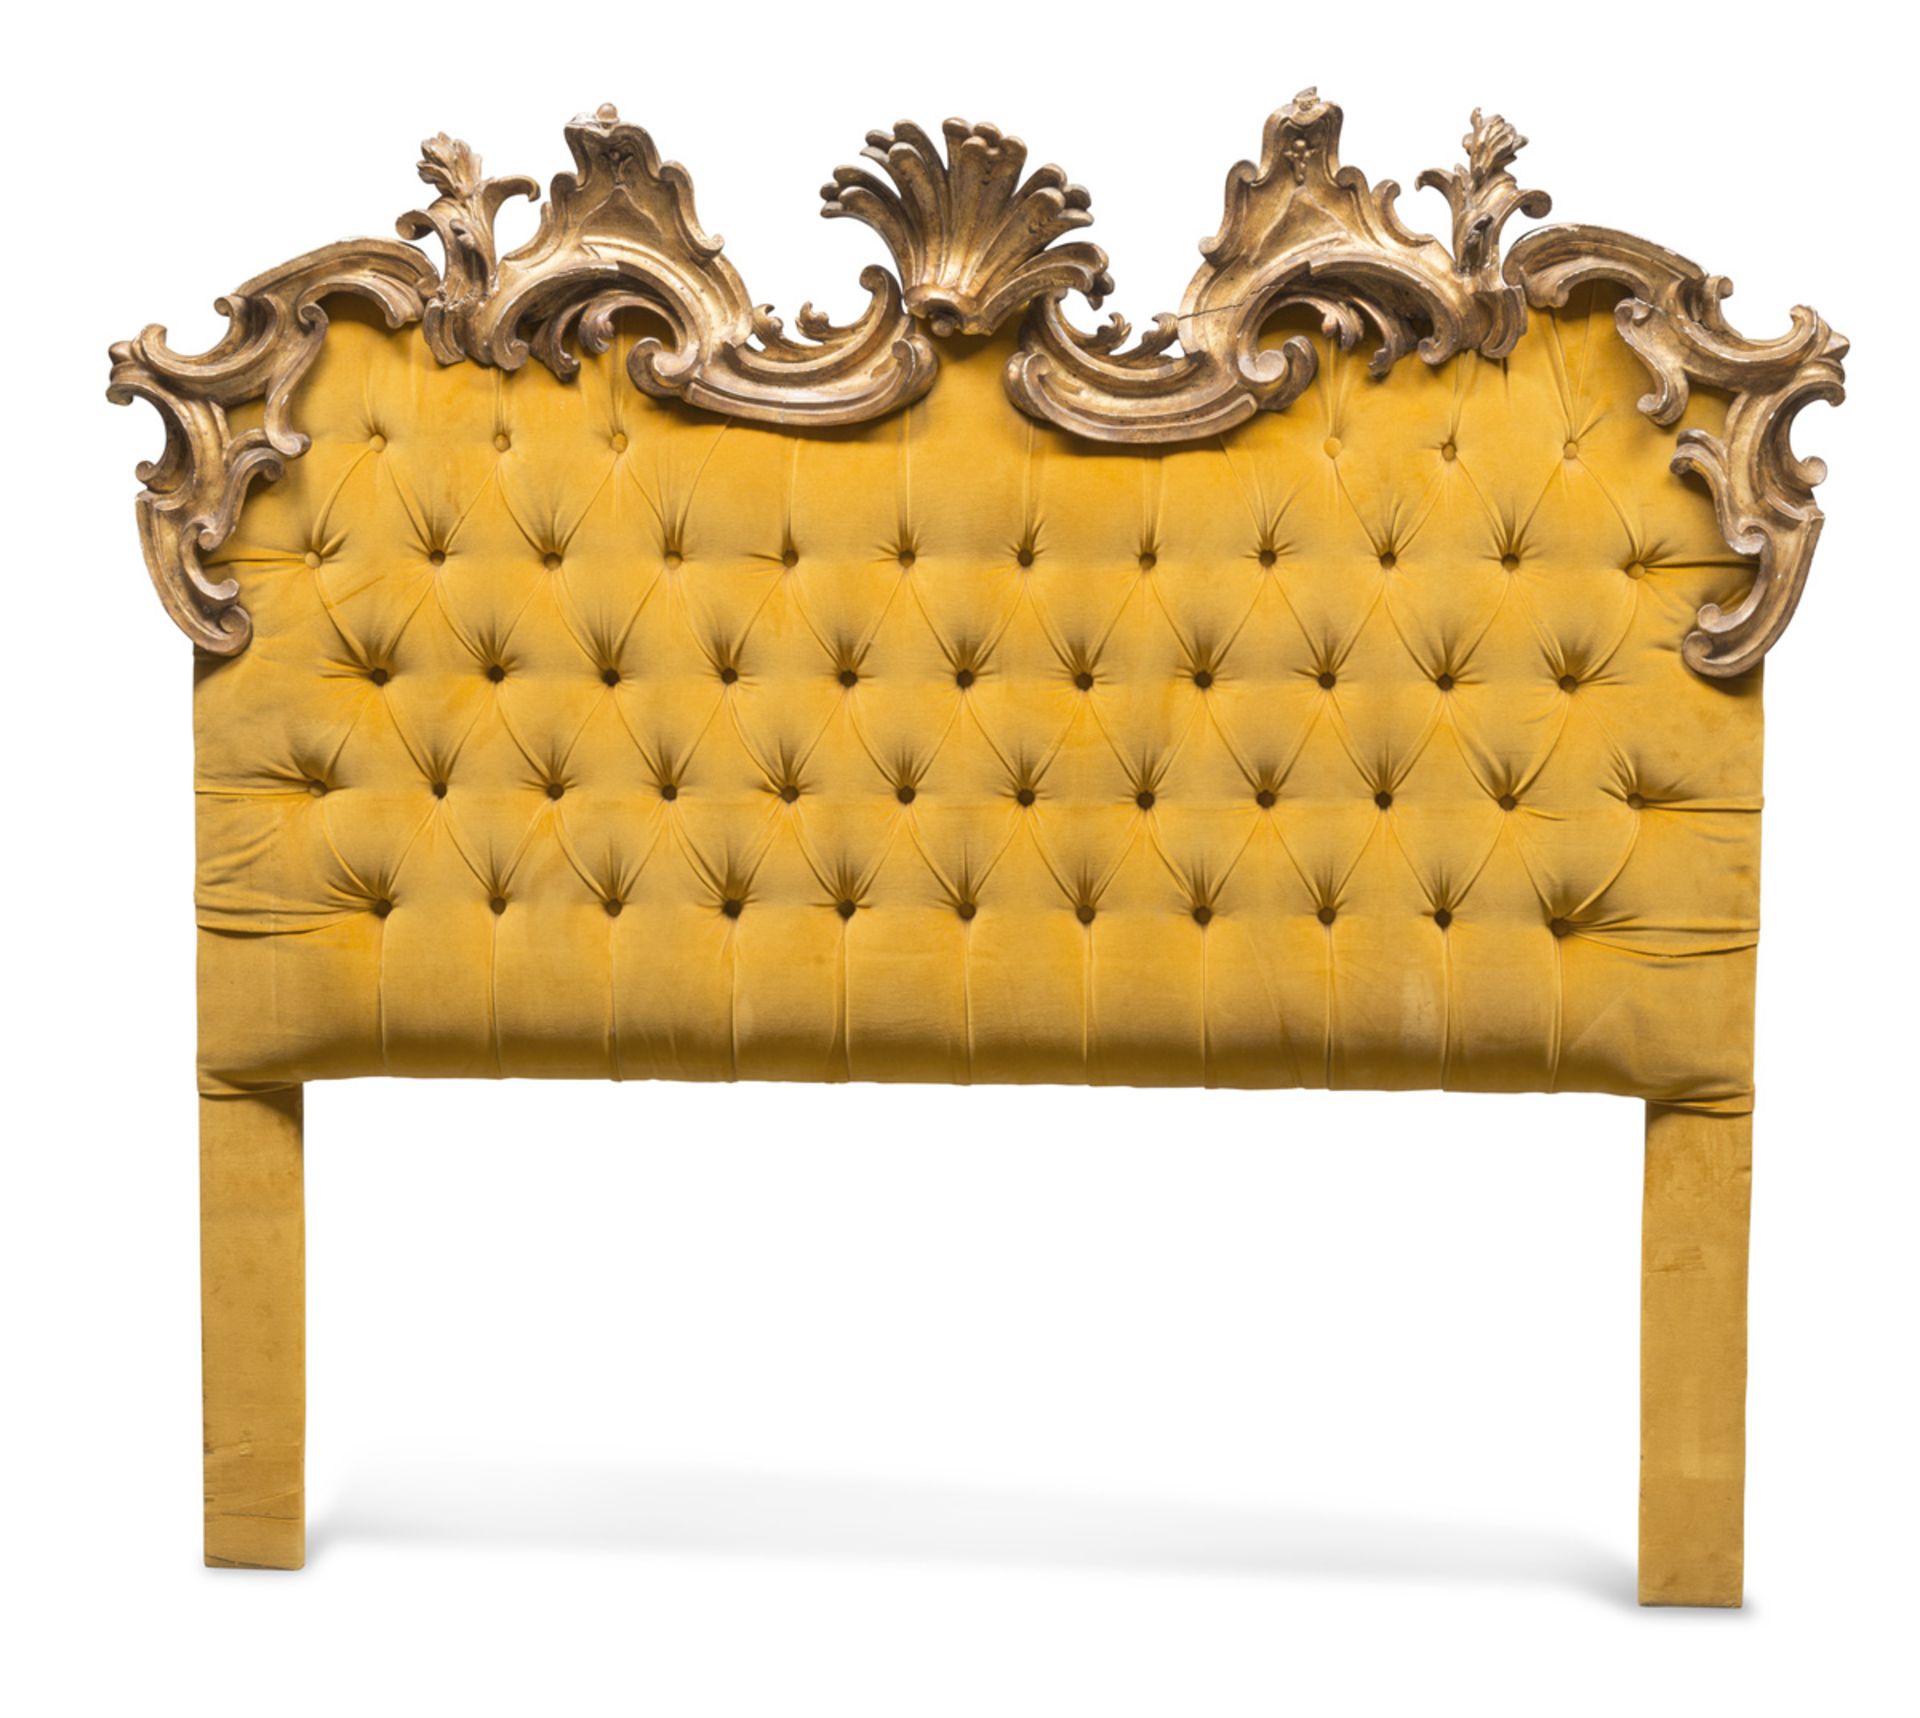 BEAUTIFUL BEDHEAD IN GILTWOOD ELEMENTS OF THE BAROQUE PERIOD